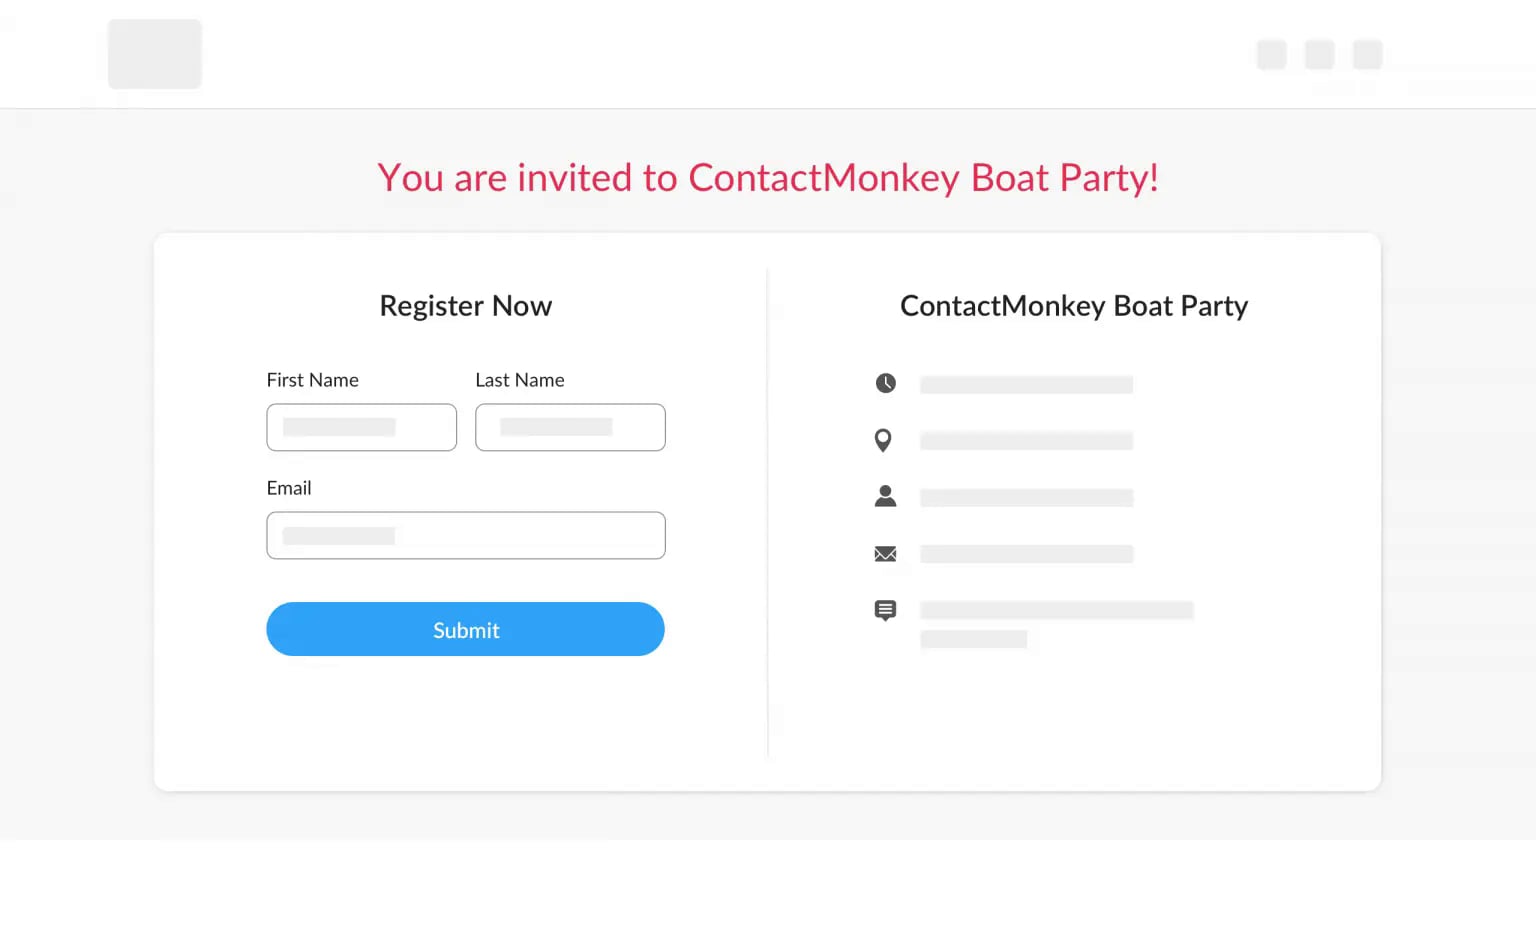 Image of event invitation created using ContactMonkey's event management feature.